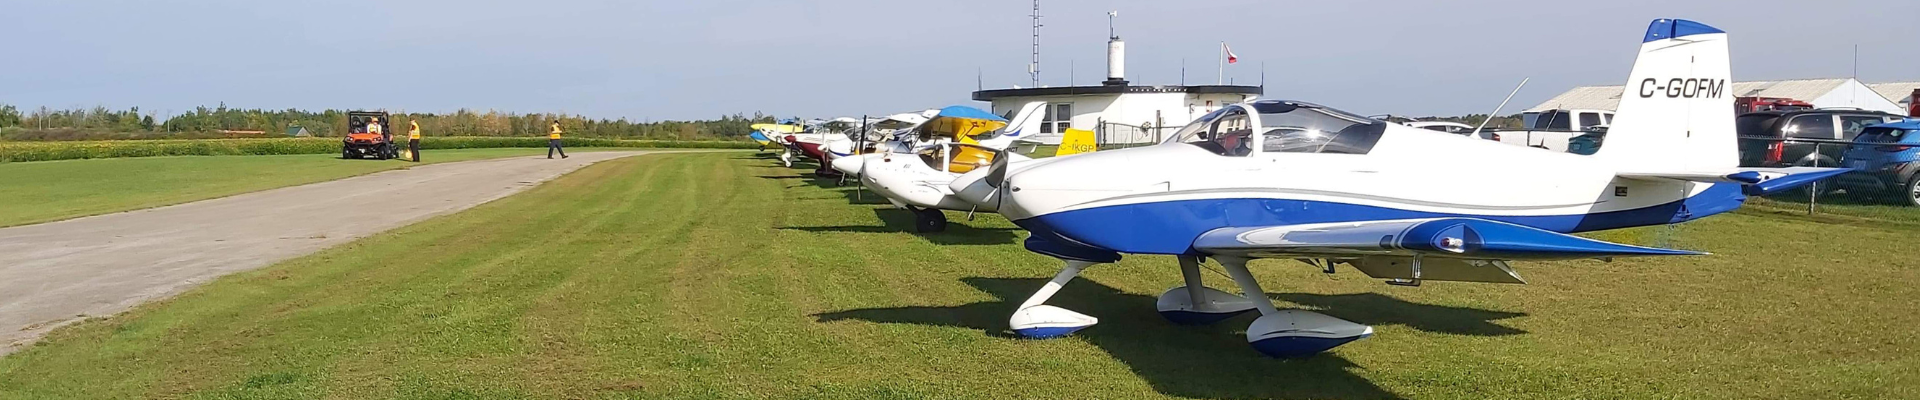 Personal aircraft line up in a row on the grass at the Brockville Airport